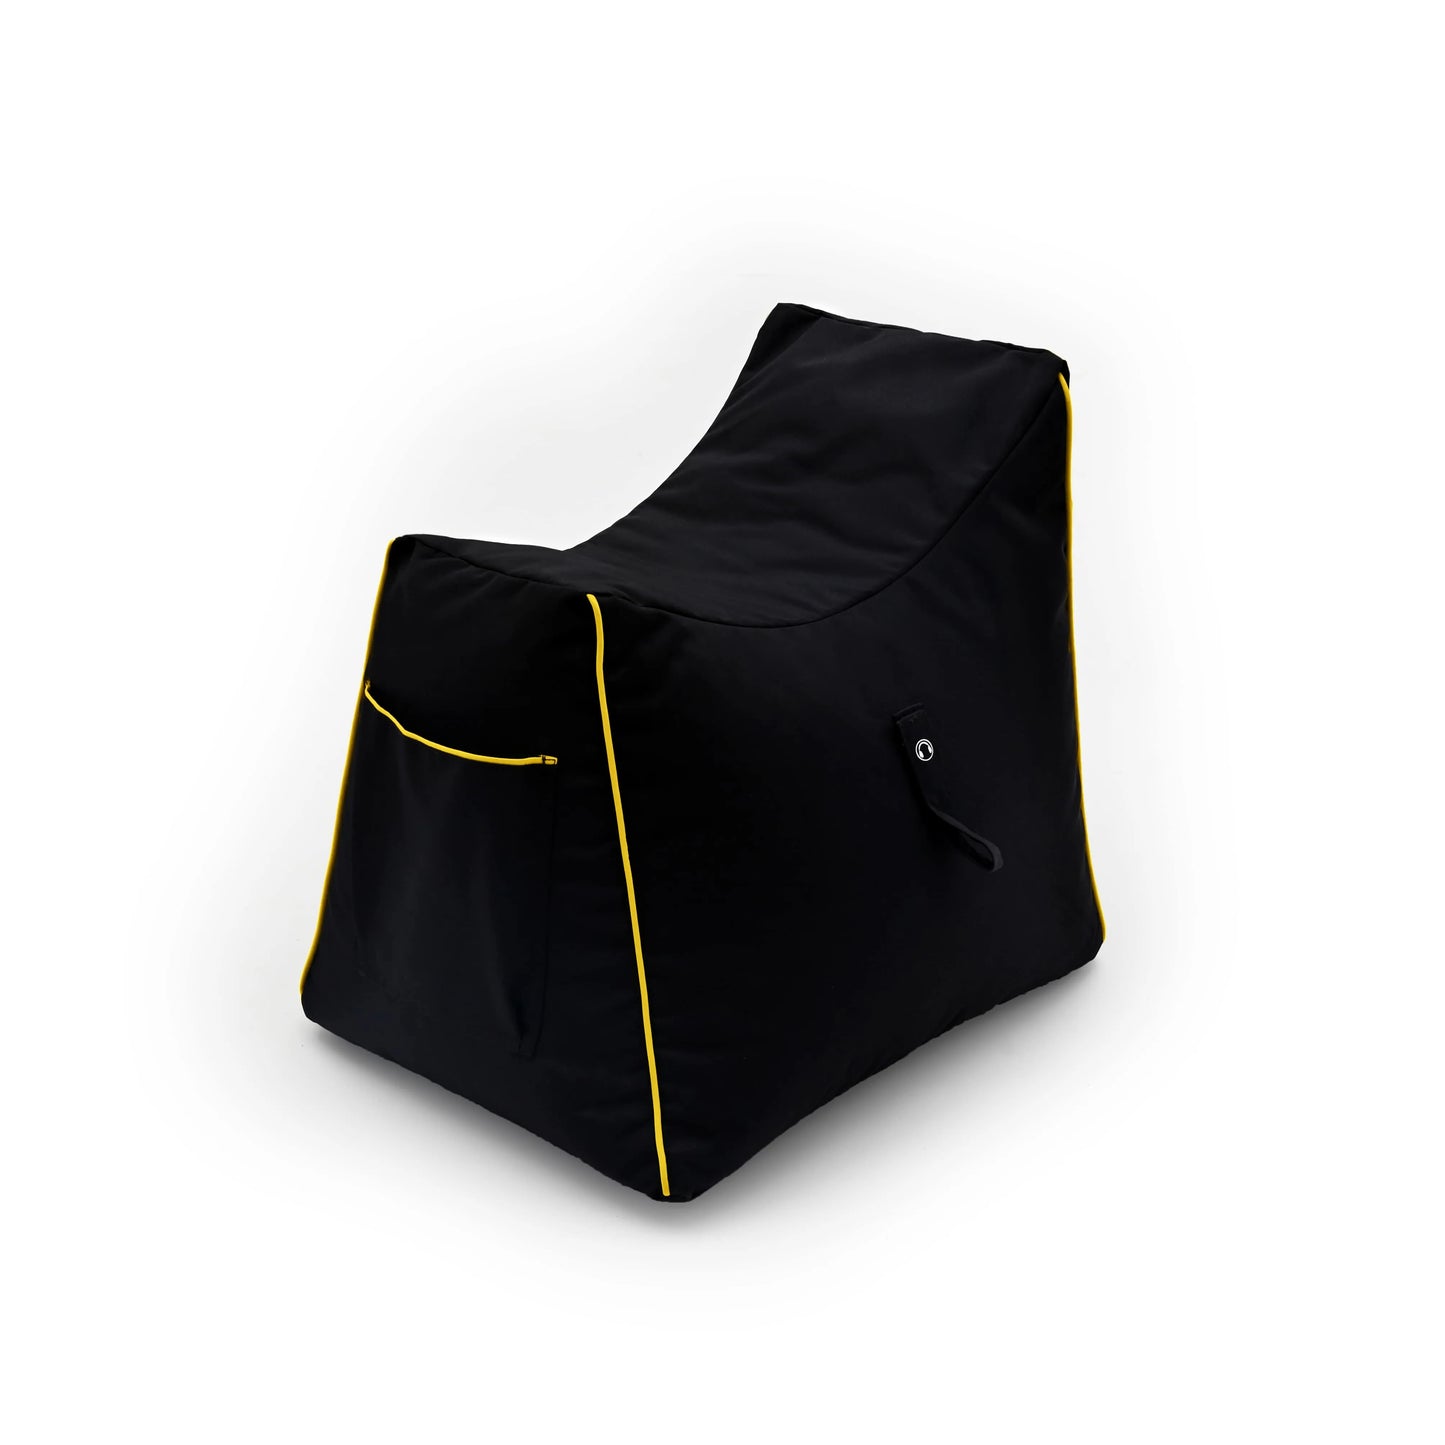 A black and yellow beanbag chair, perfect for relaxing or gaming.